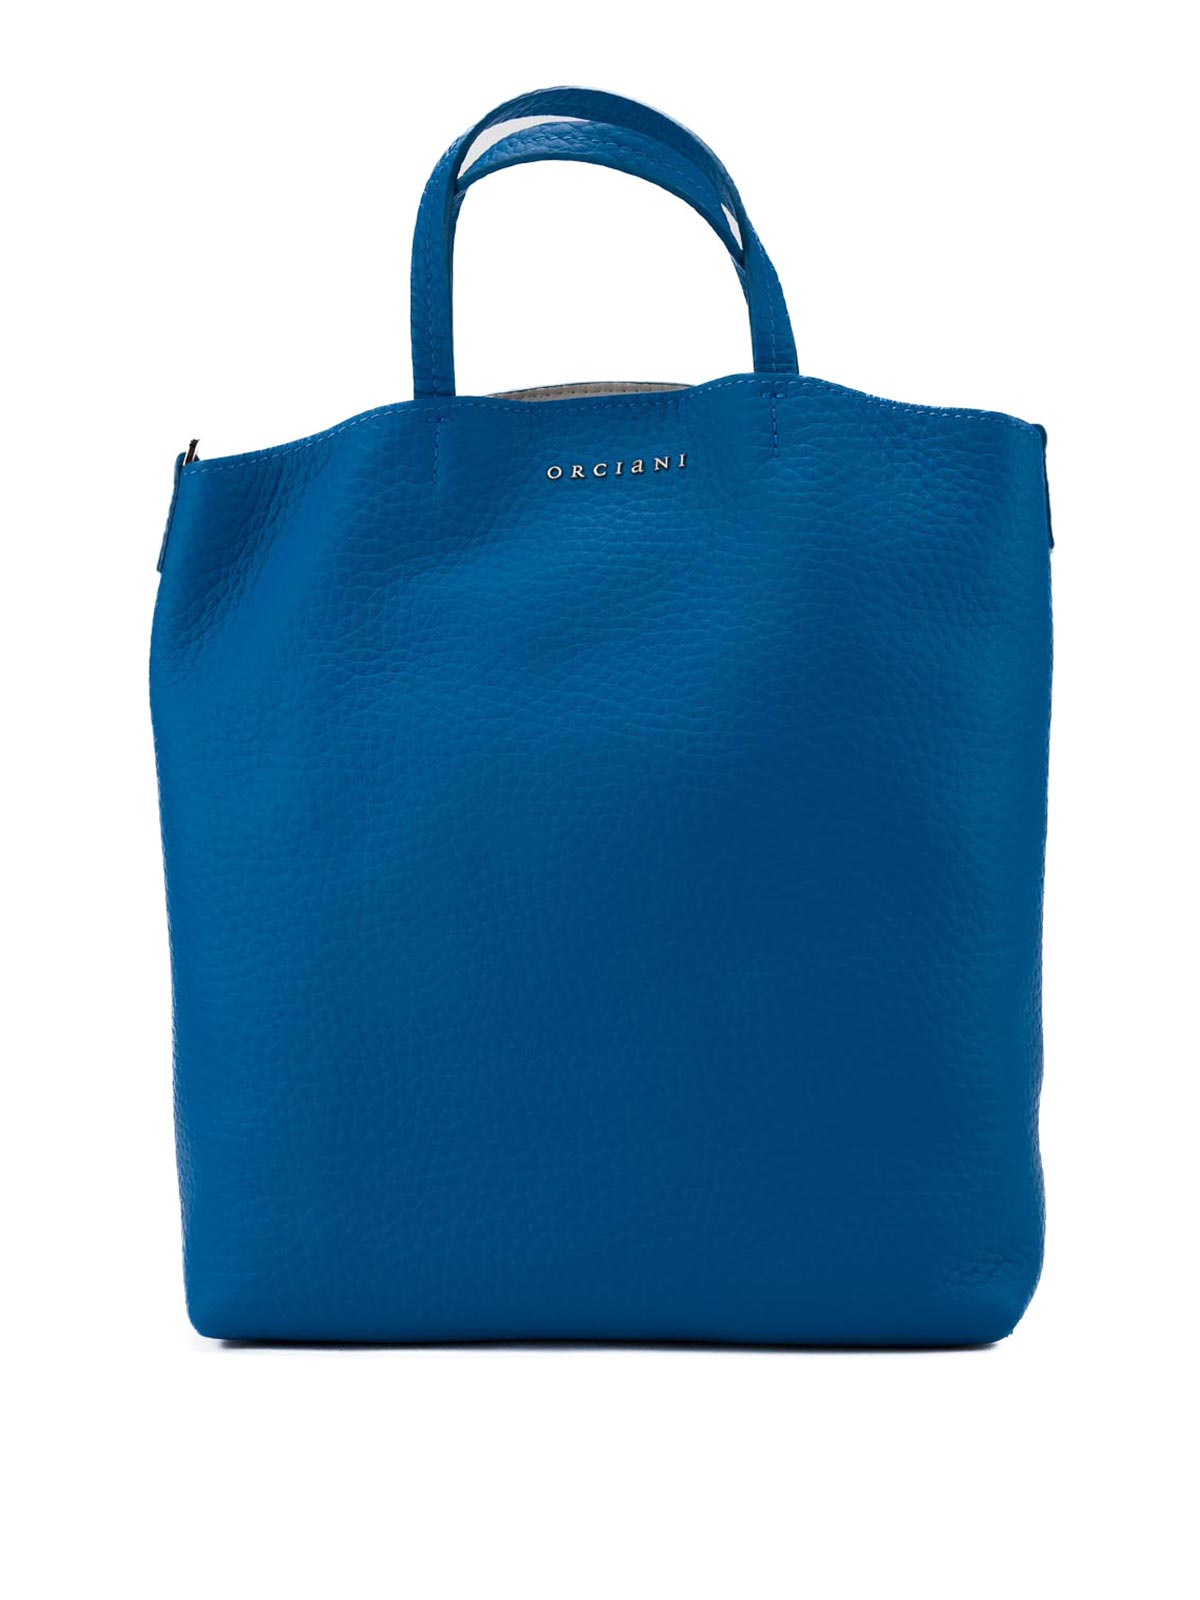 Orciani Leather Shopping Bag In Blue